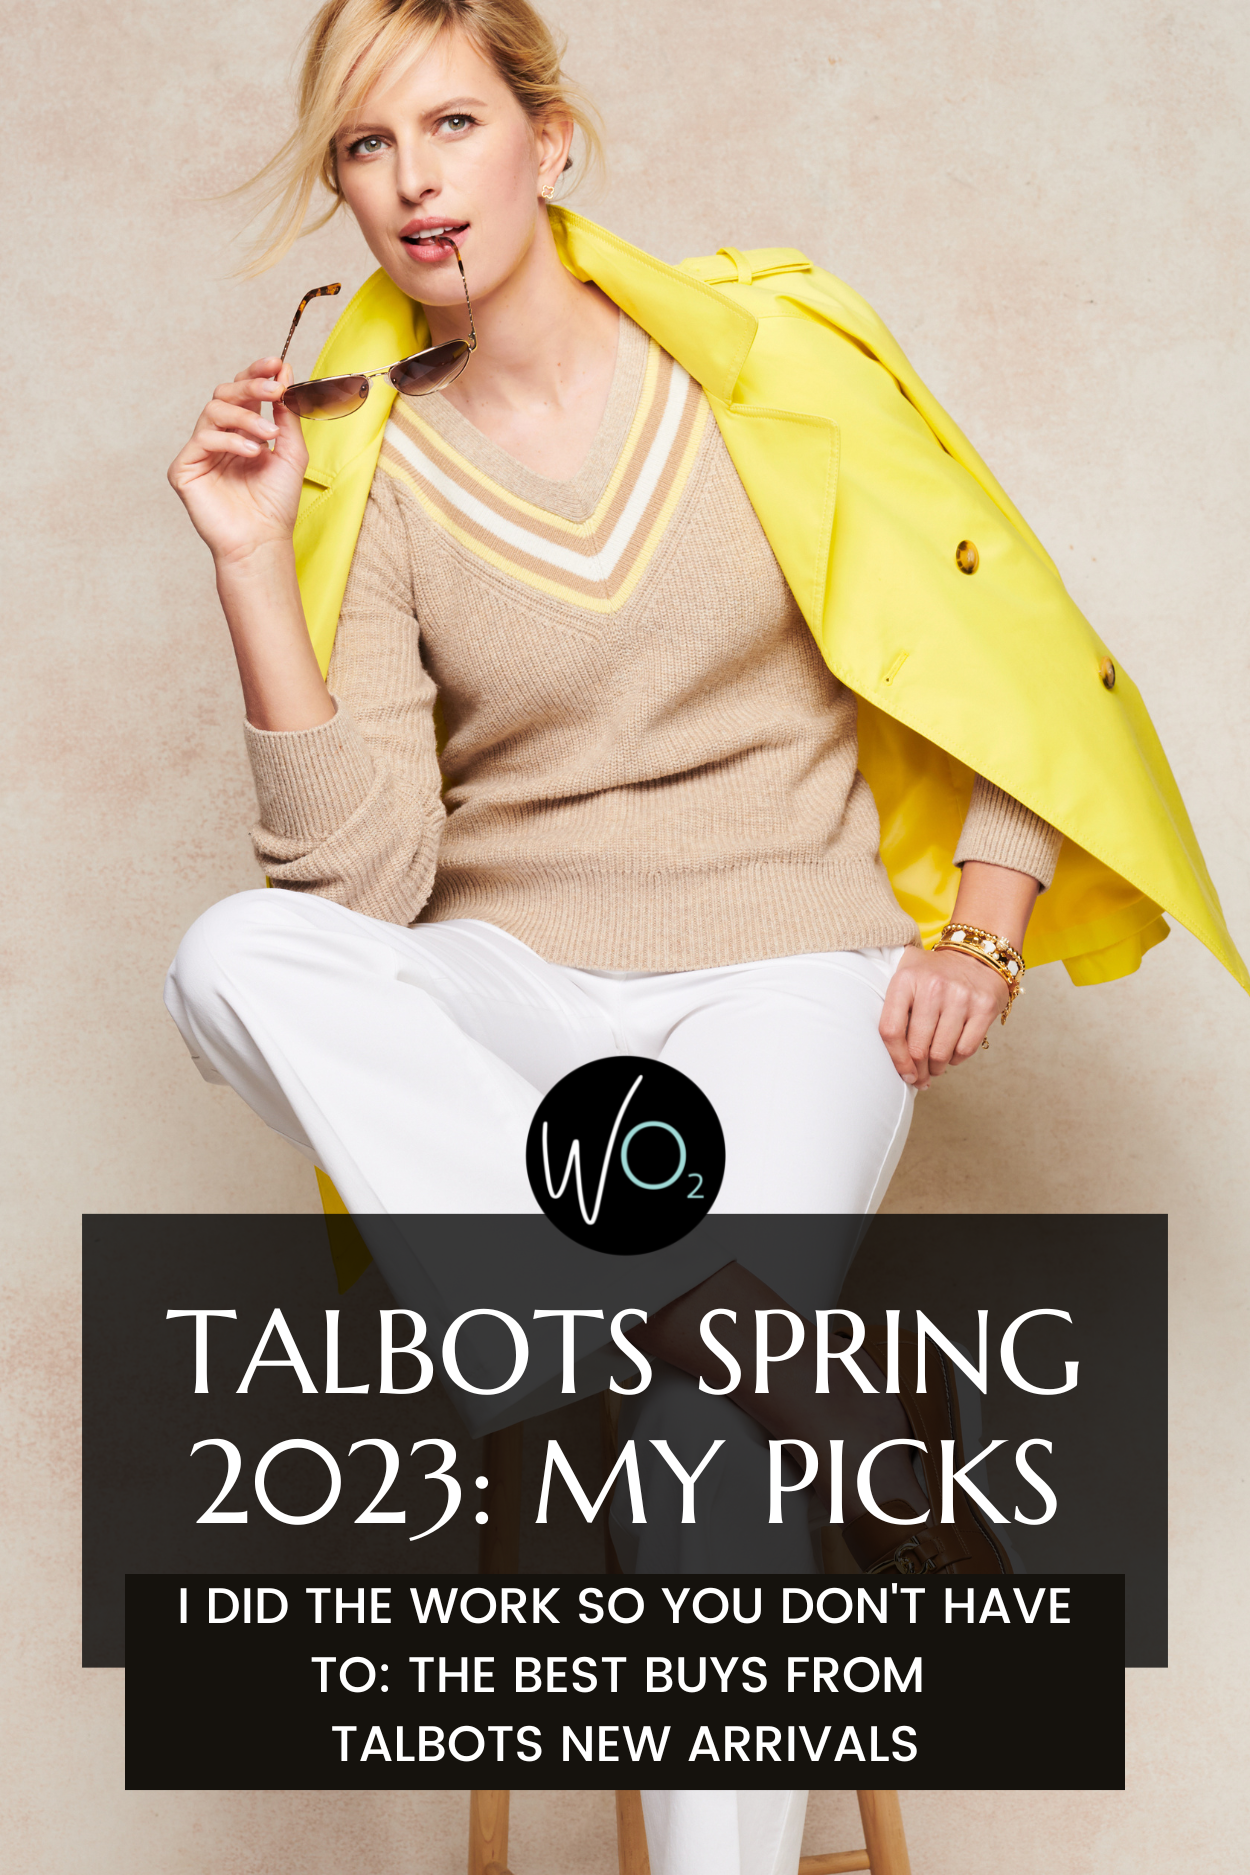 Talbots Refined Cotton Trench Coat  Coats for women, Coat, Coat outfits